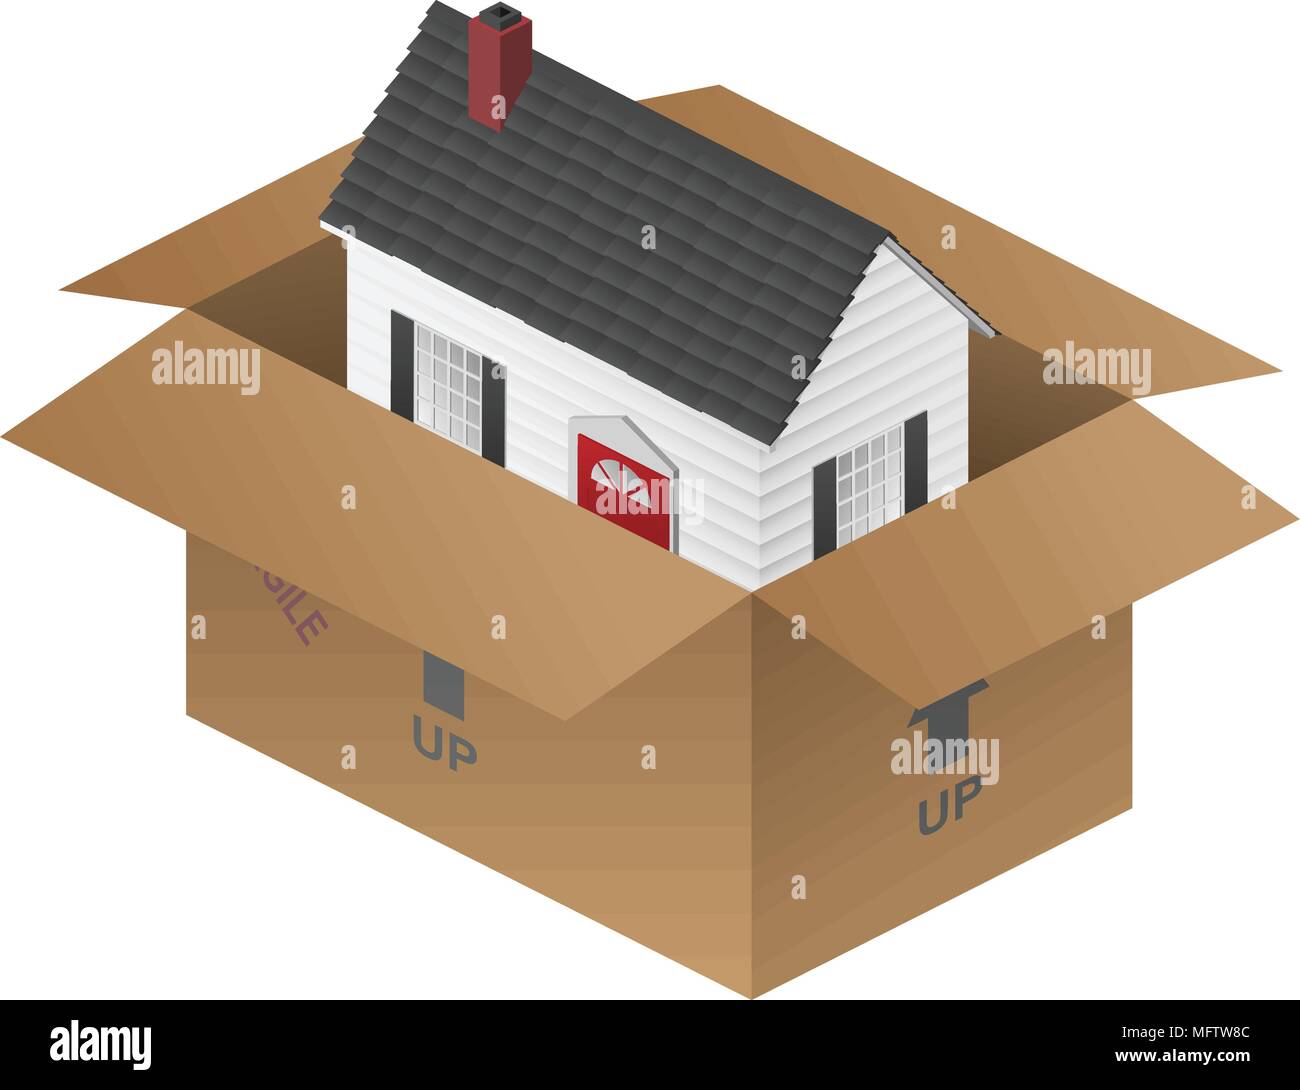 Real-estate Moving House Packing Box Vector Illustration Stock Vector